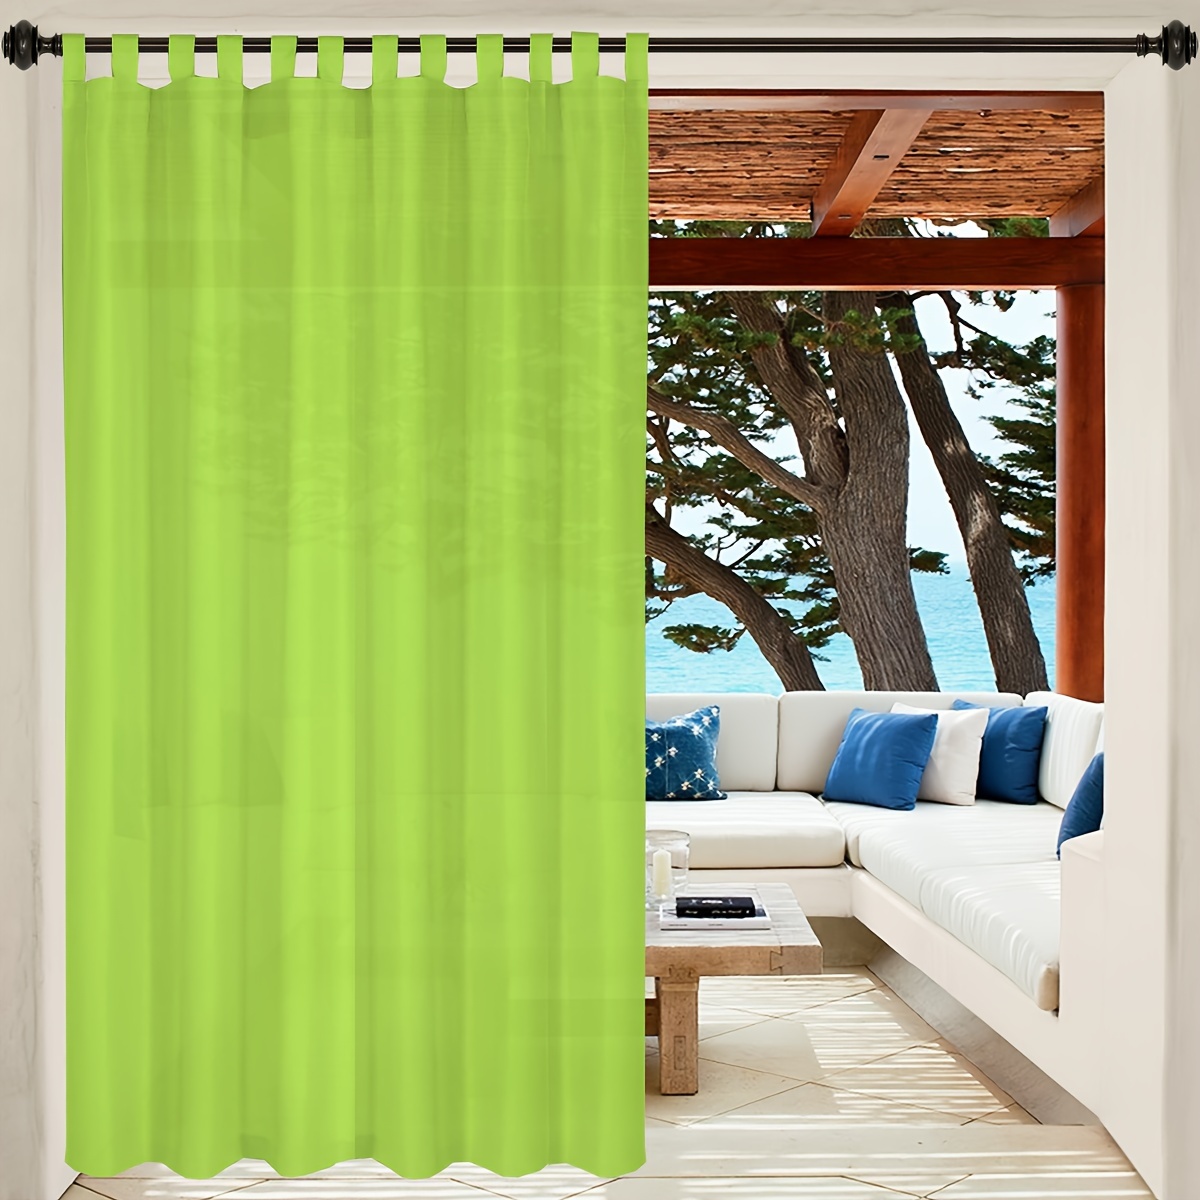 

Waterproof Outdoor Curtain With Grommets - Decorative Art Deco Style, Suitable For All Seasons, Provides Privacy And Softens Light